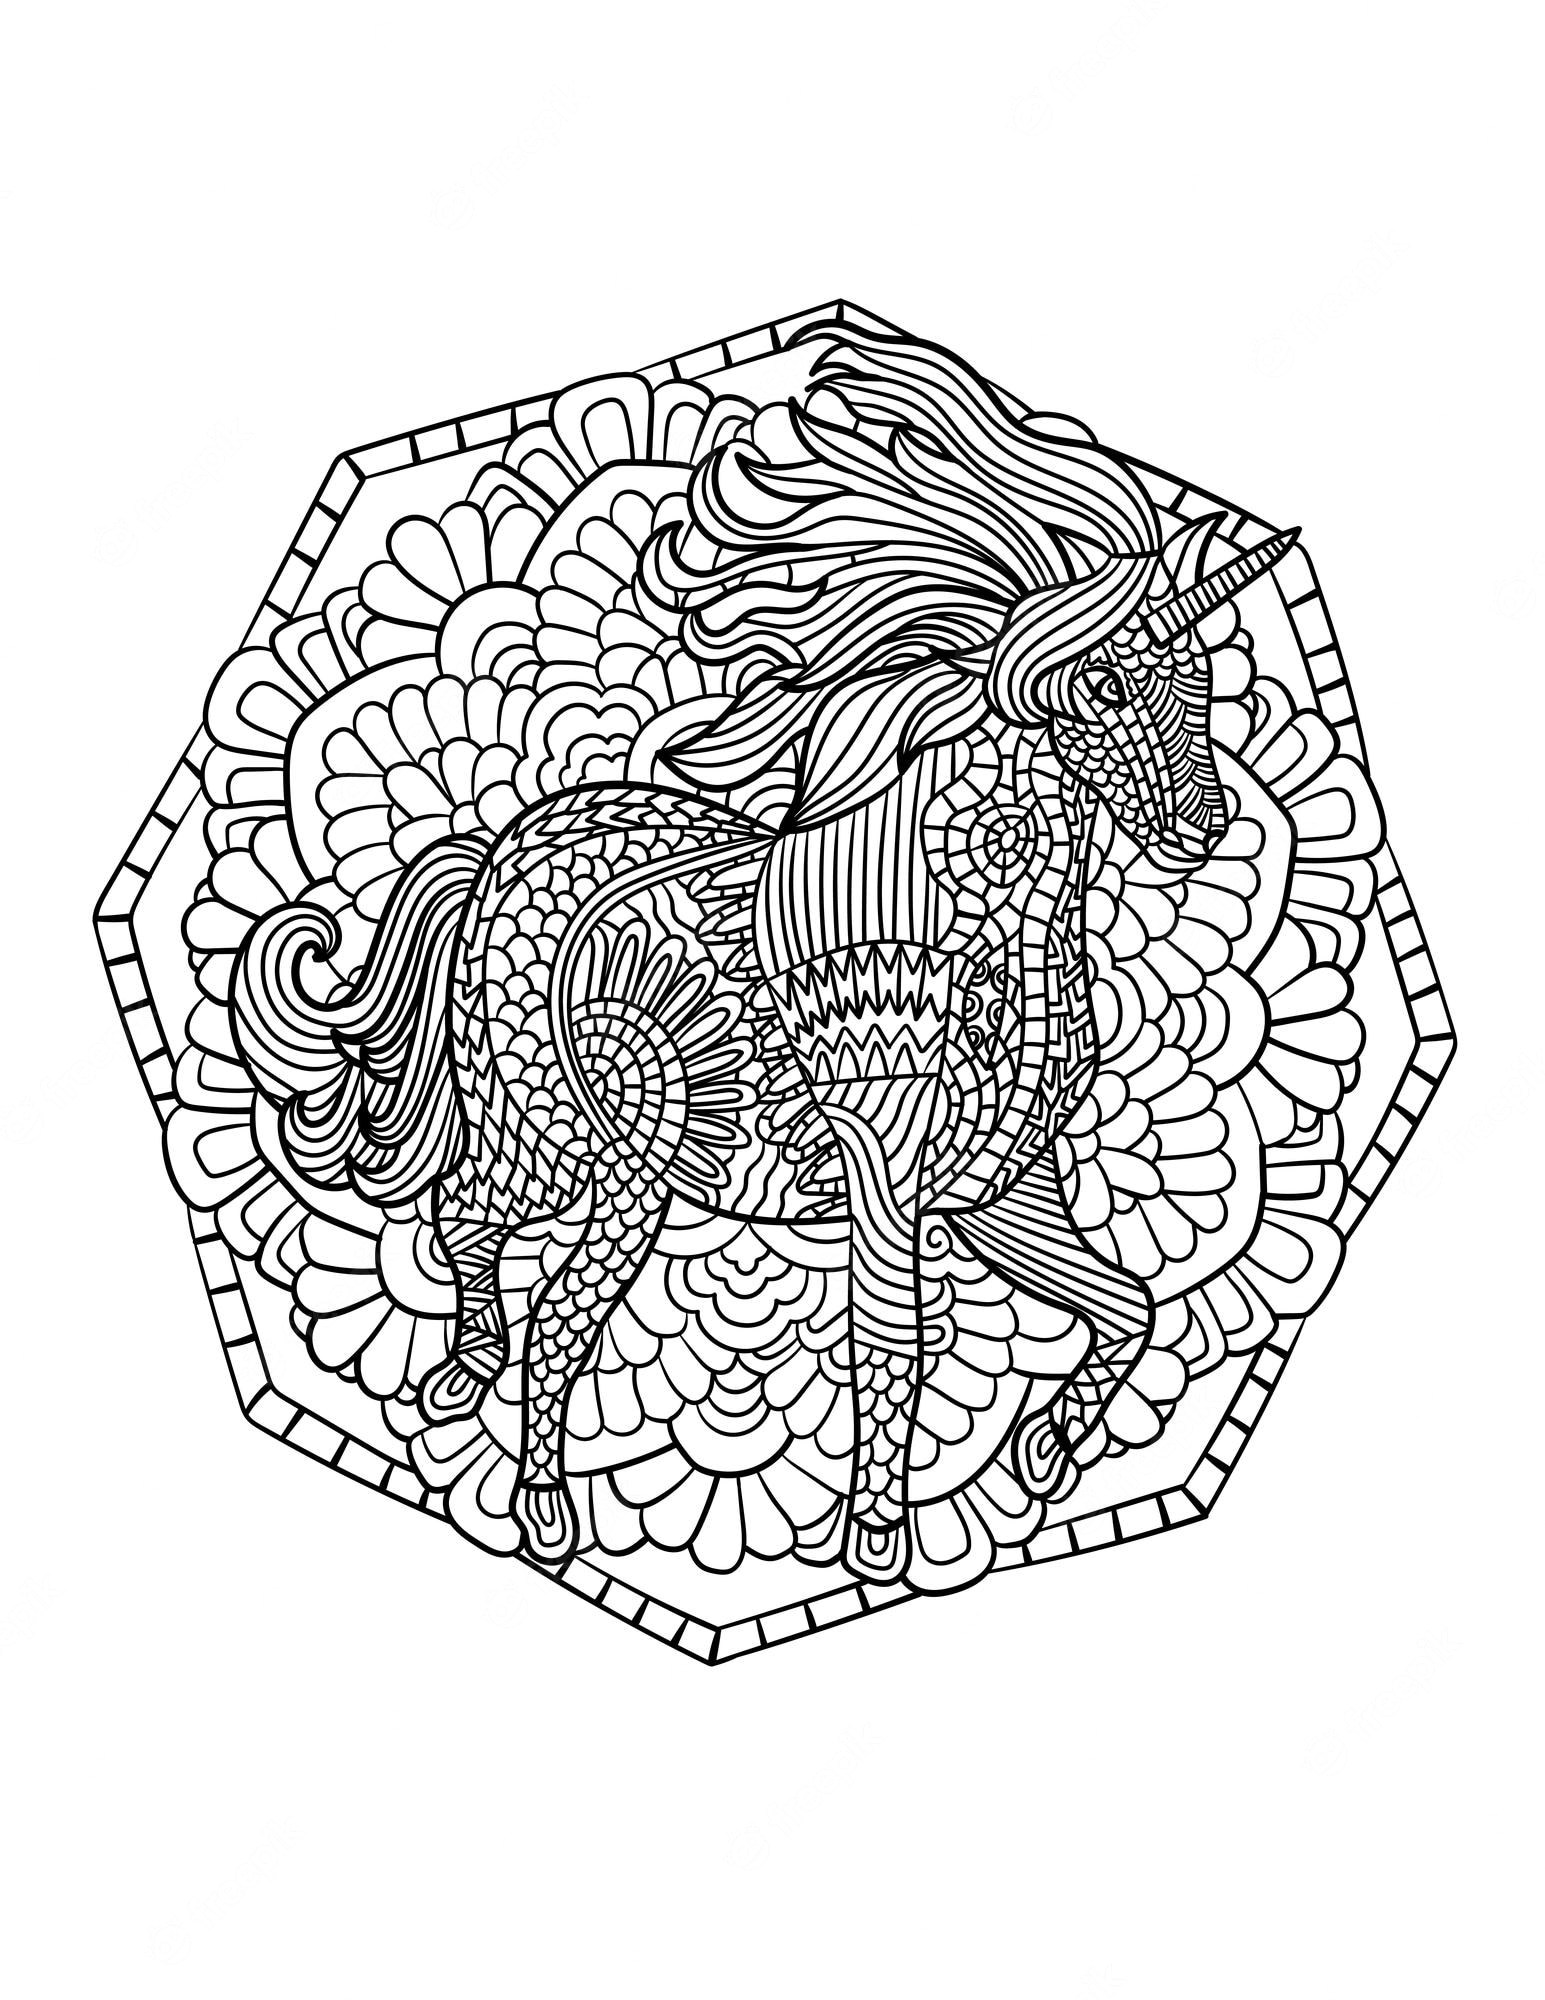 Premium Vector | Unicorn mandala coloring pages for adults